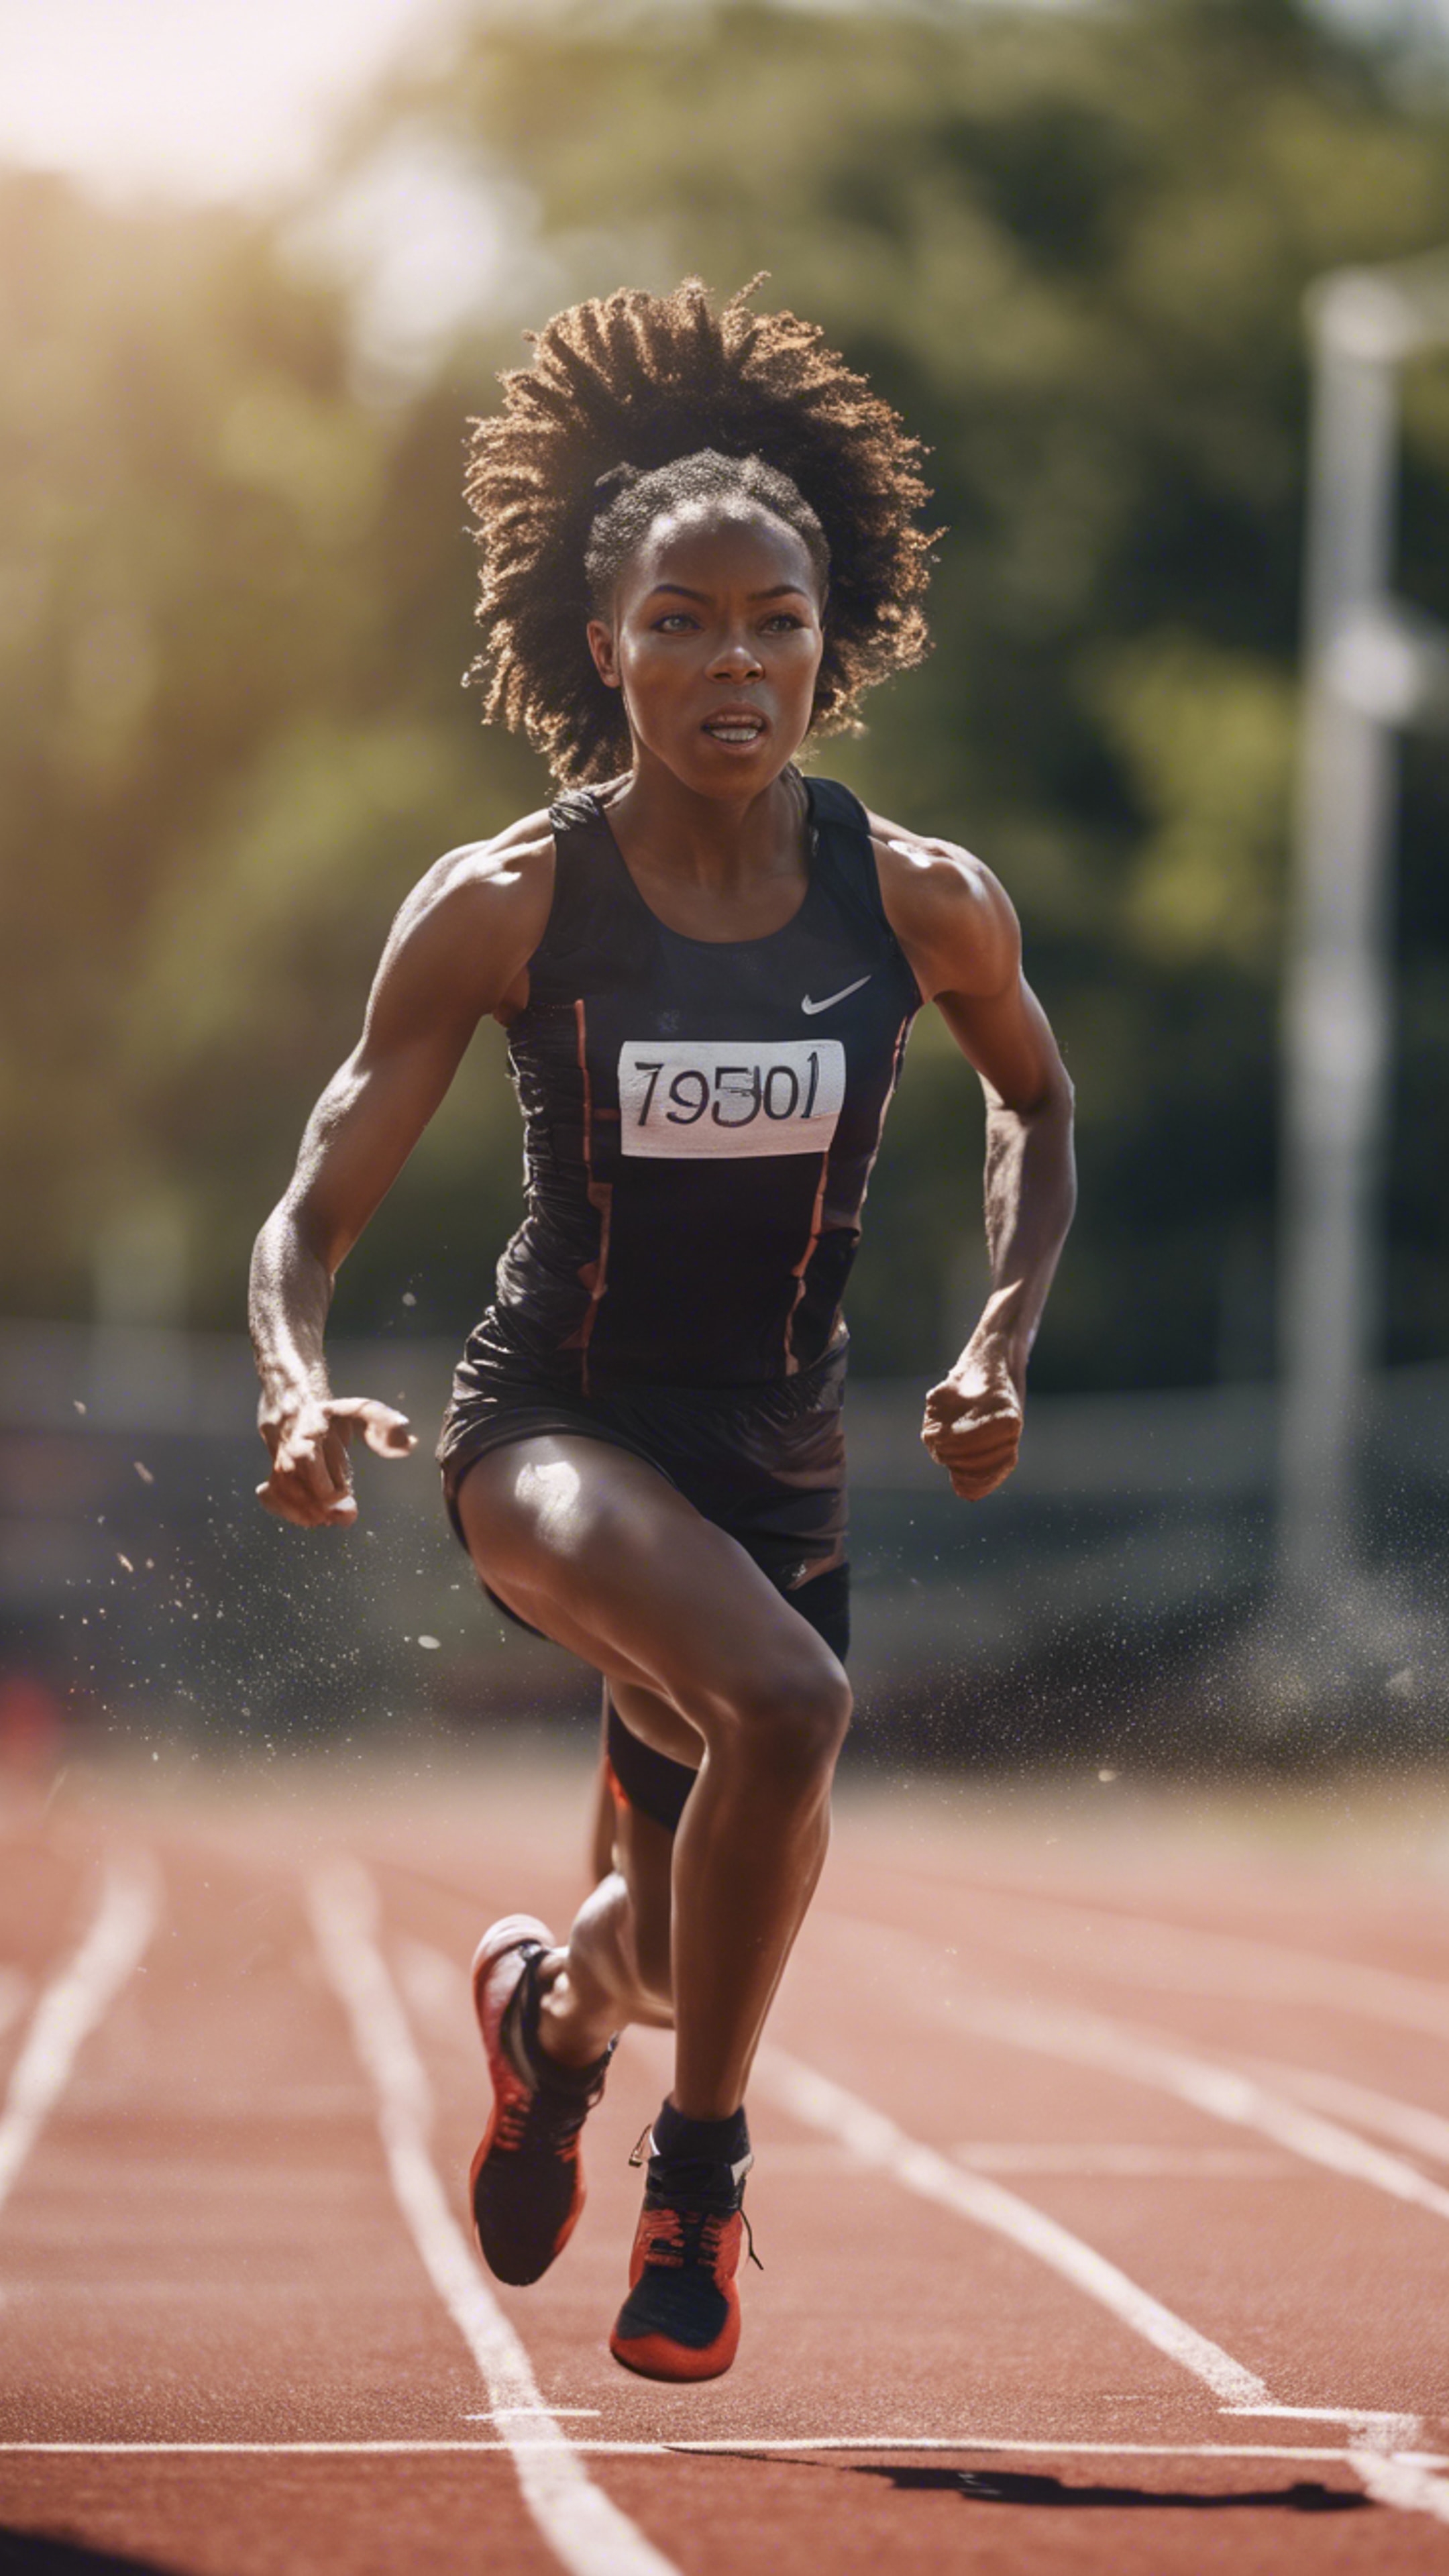 A dynamic image of a black girl engaging in competitive sprint, showing her vital energy. Tapeta[76eb5b44f4a84b498fc2]